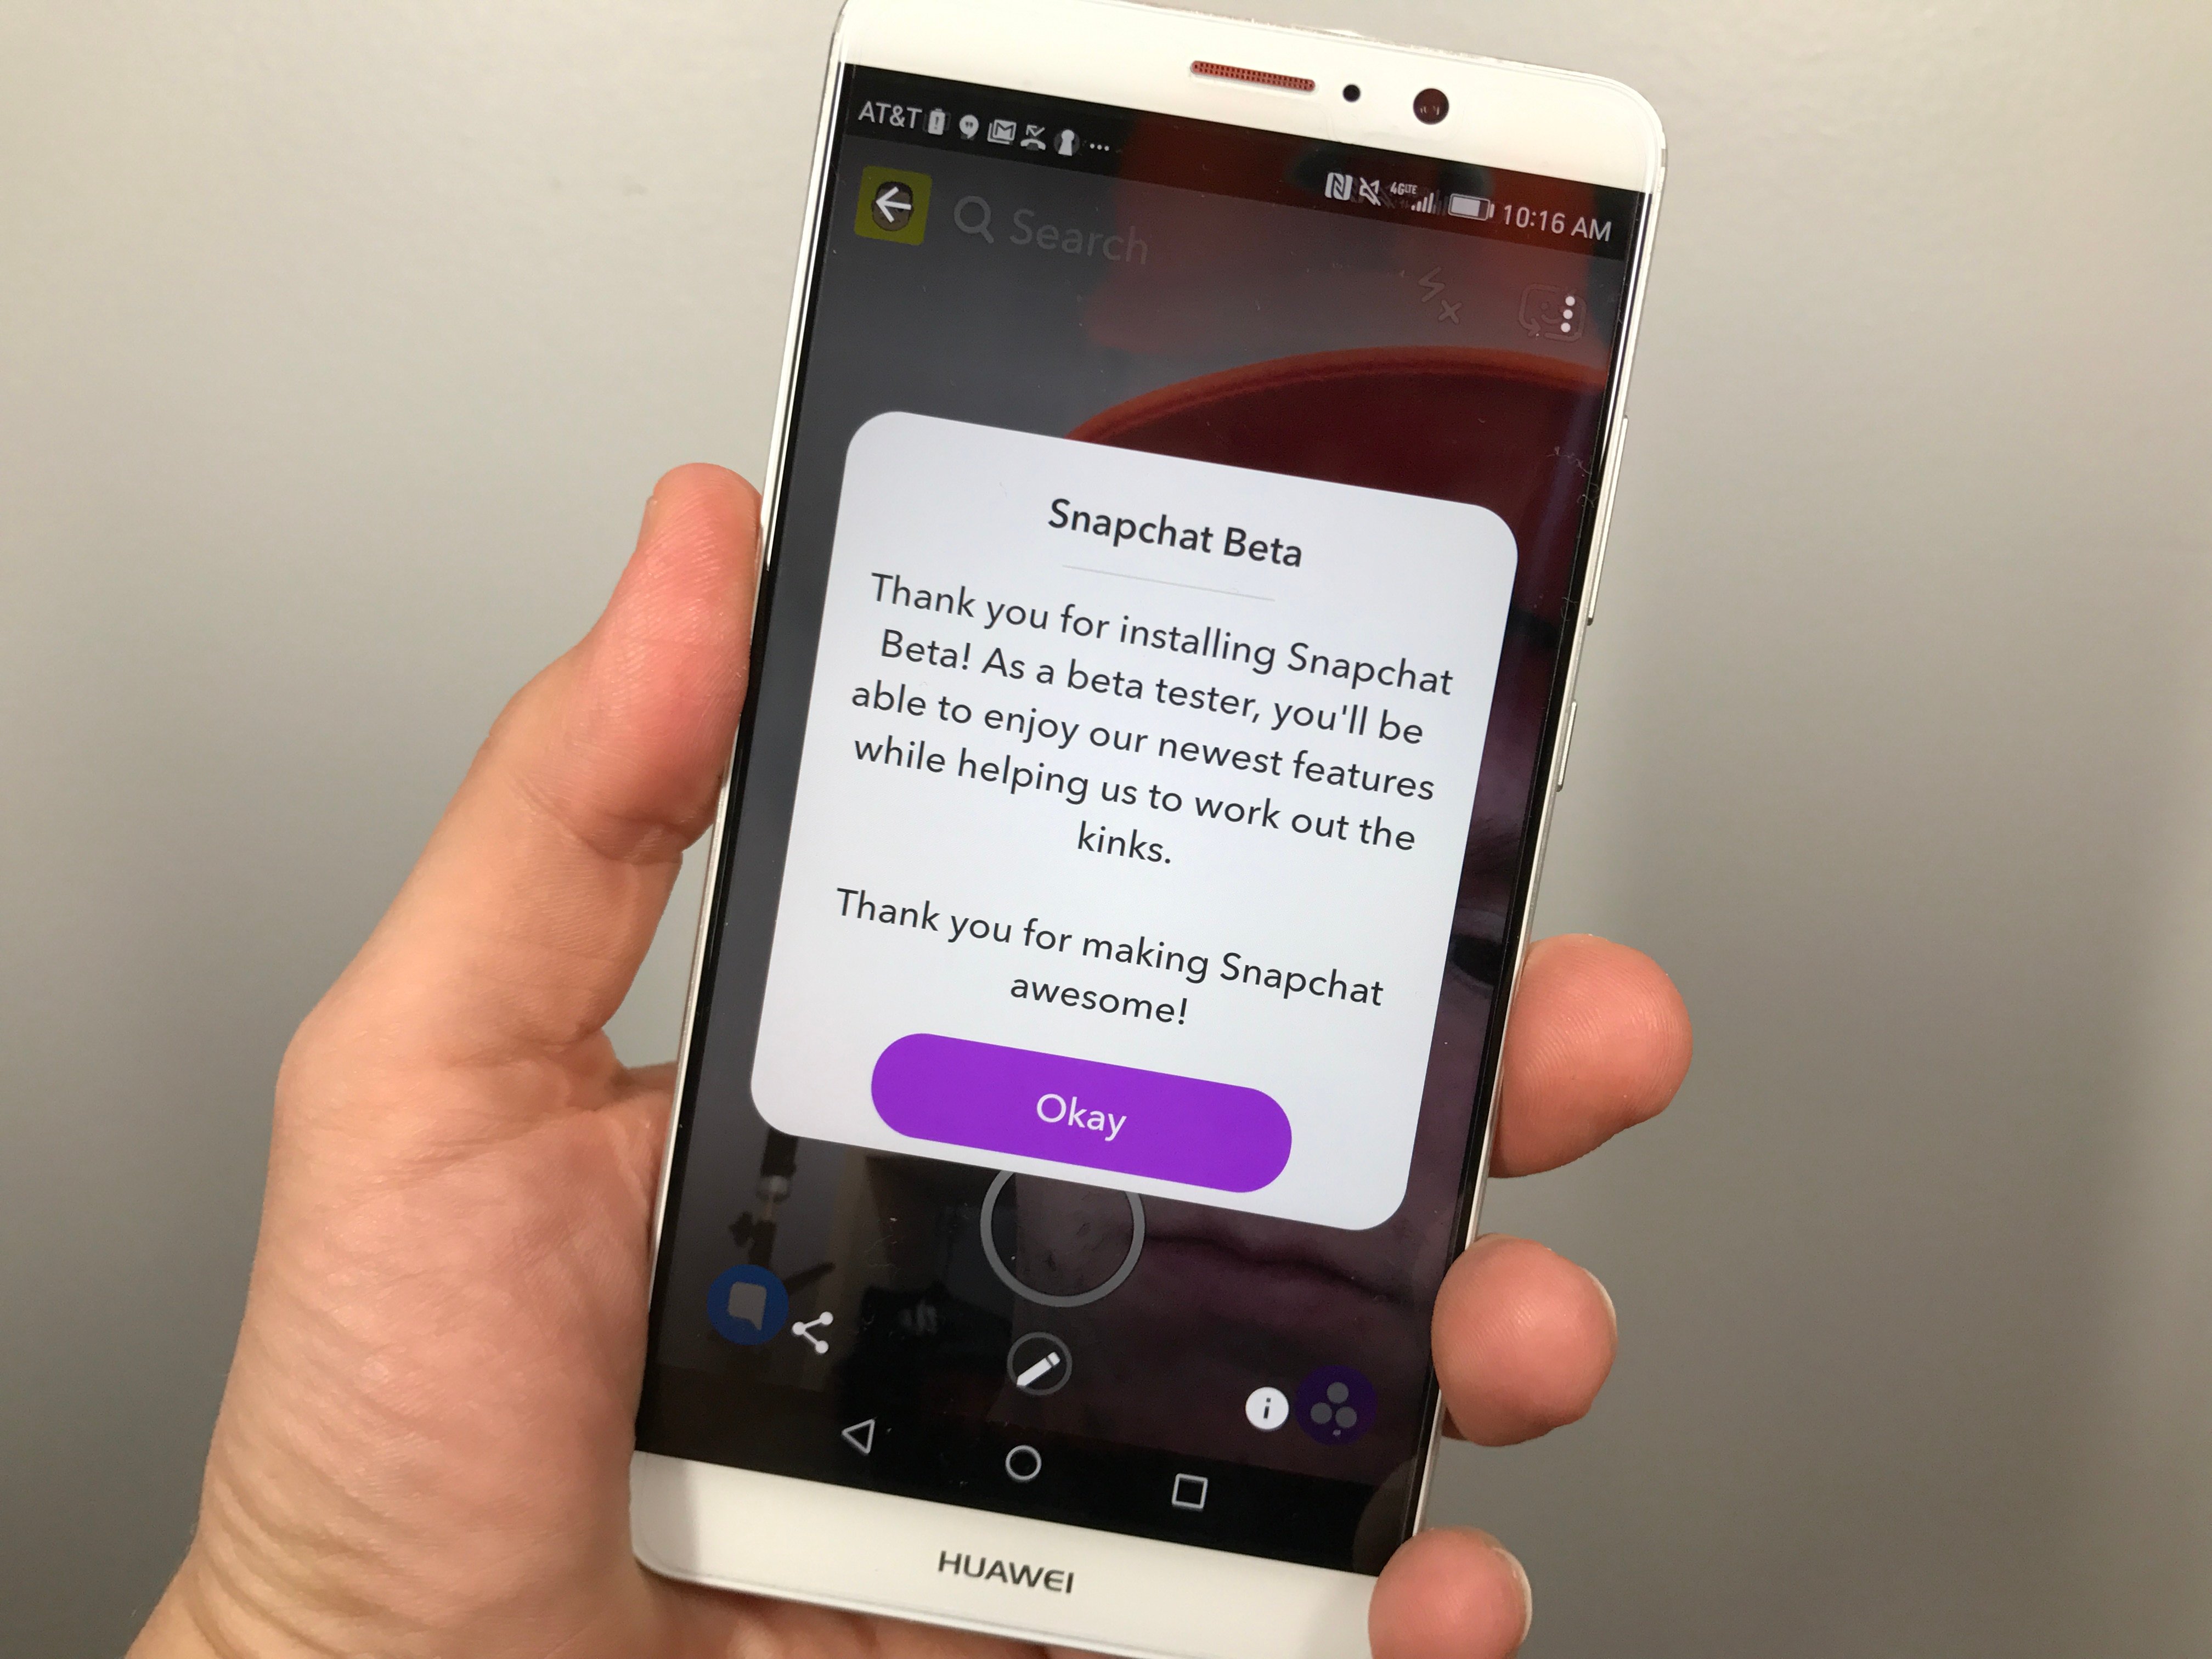 Learn how to join the Snapchat beta to test new features.